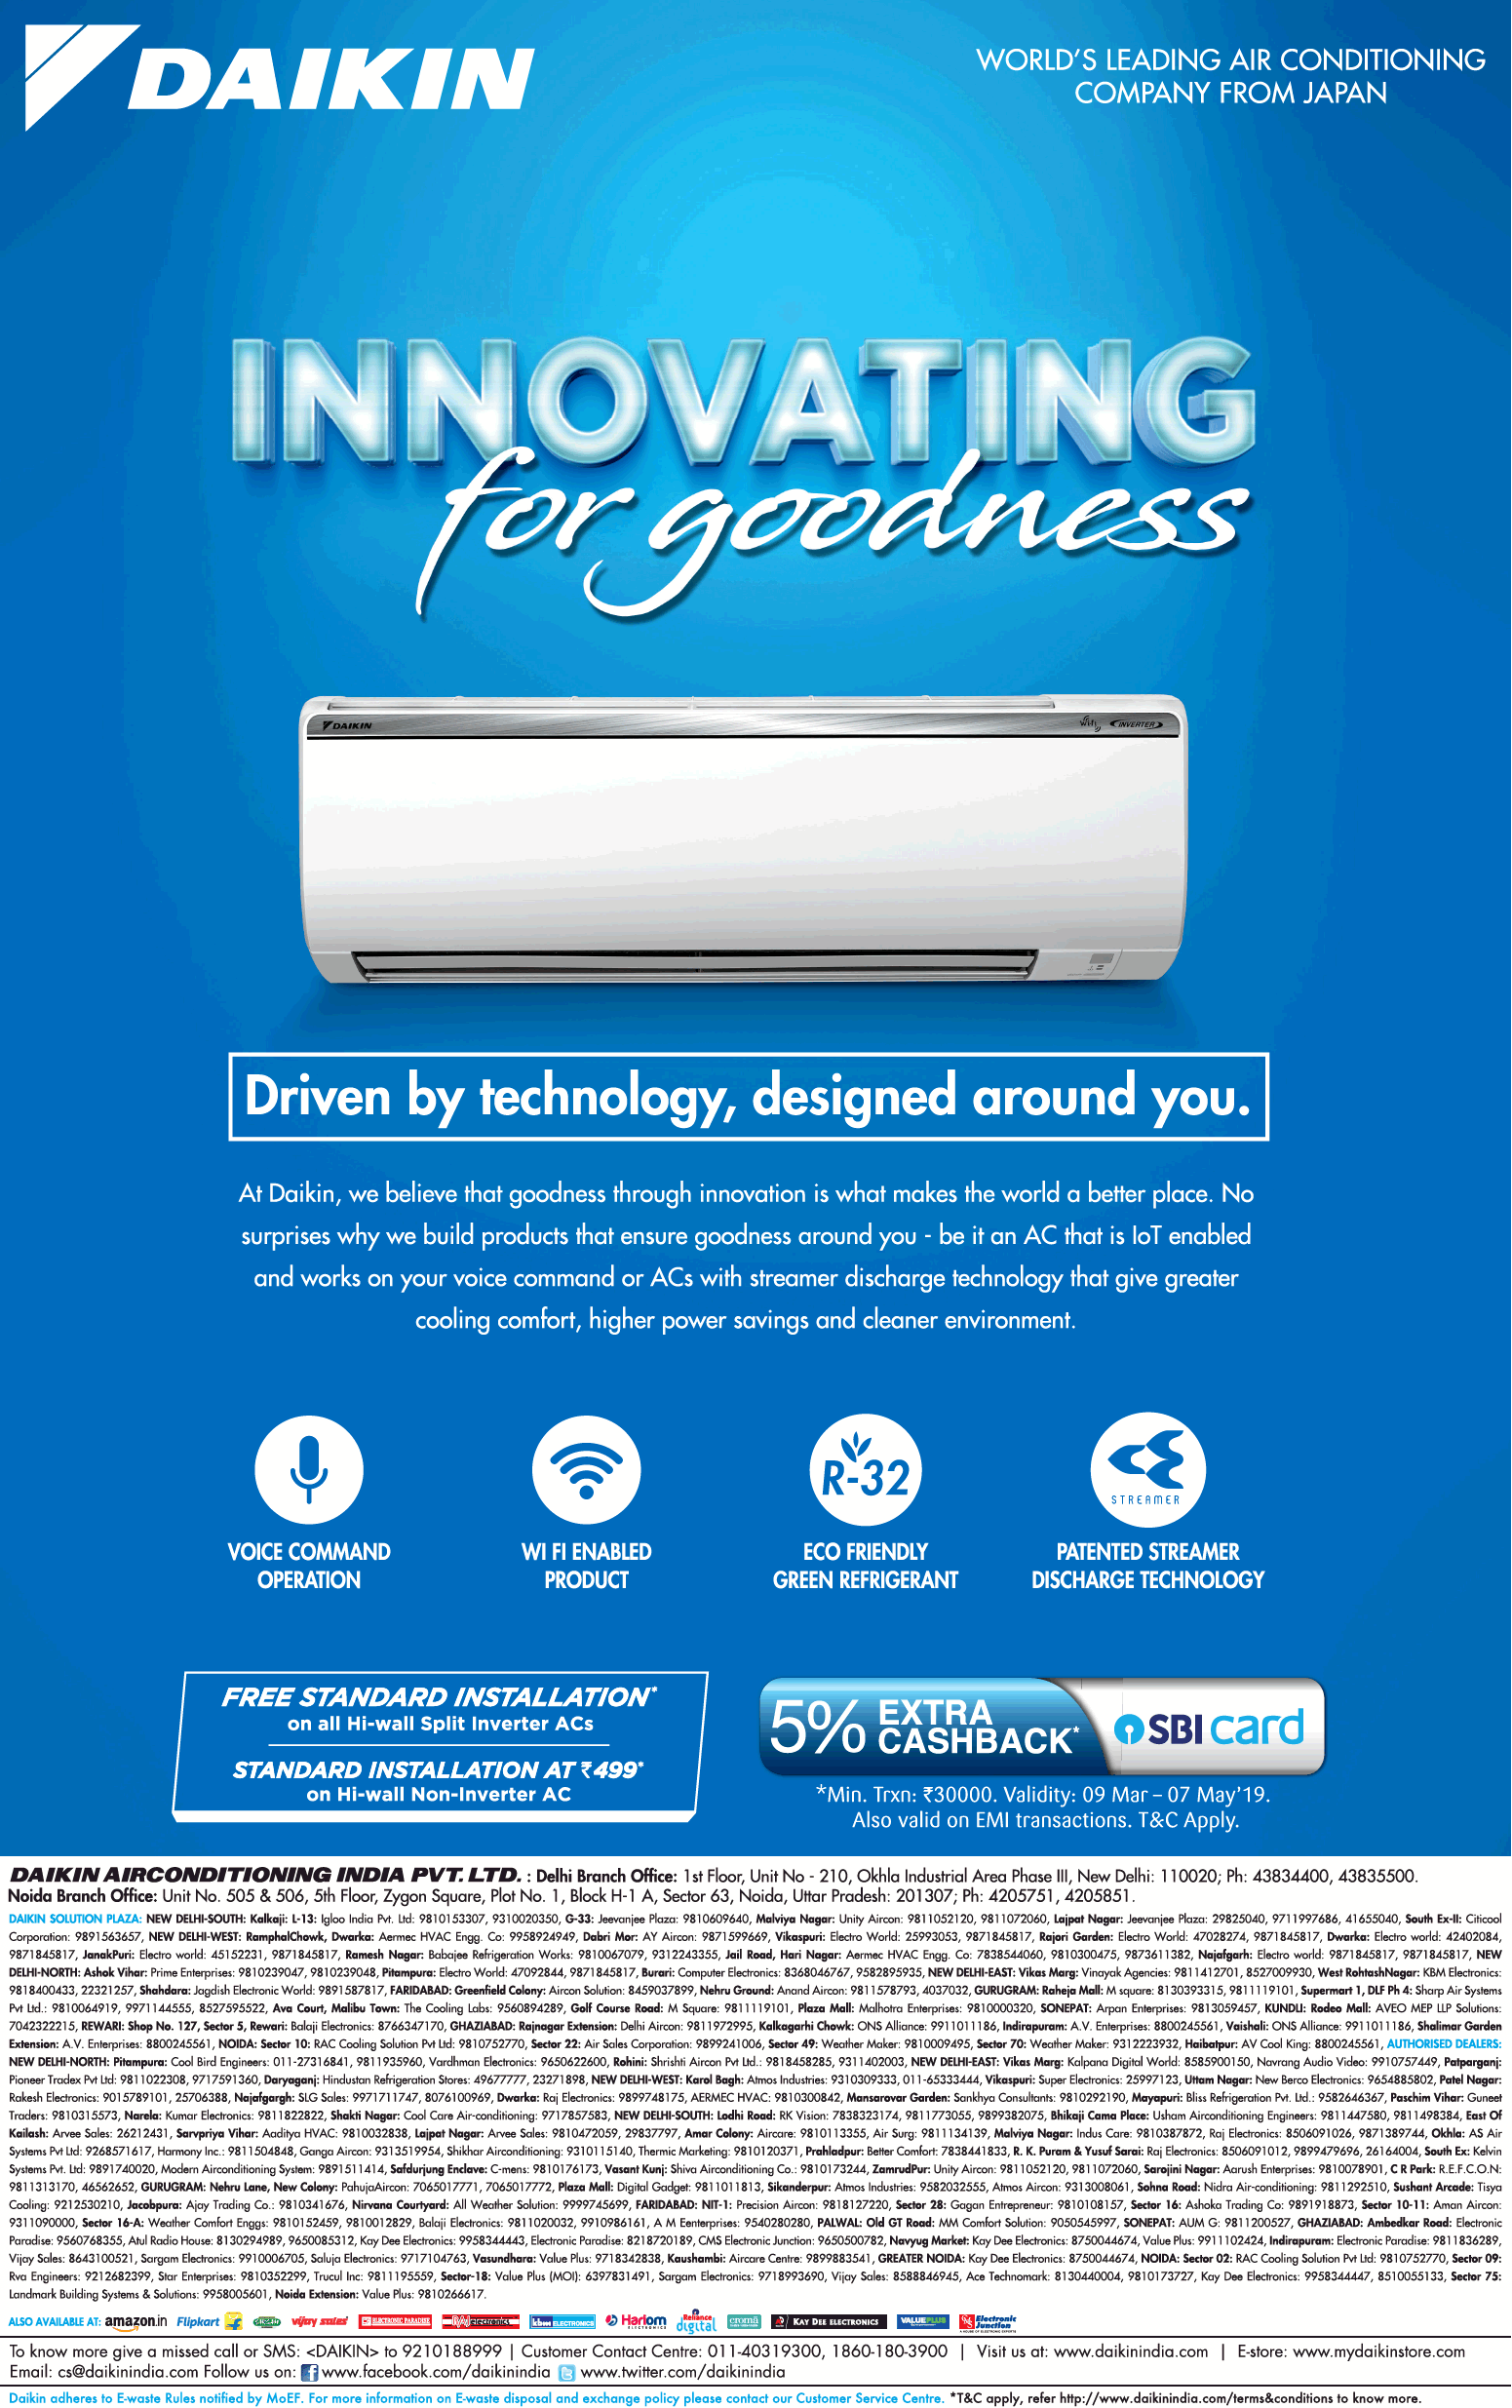 daikin-air-conditioners-innovating-for-goodness-ad-delhi-times-26-04-2019.png